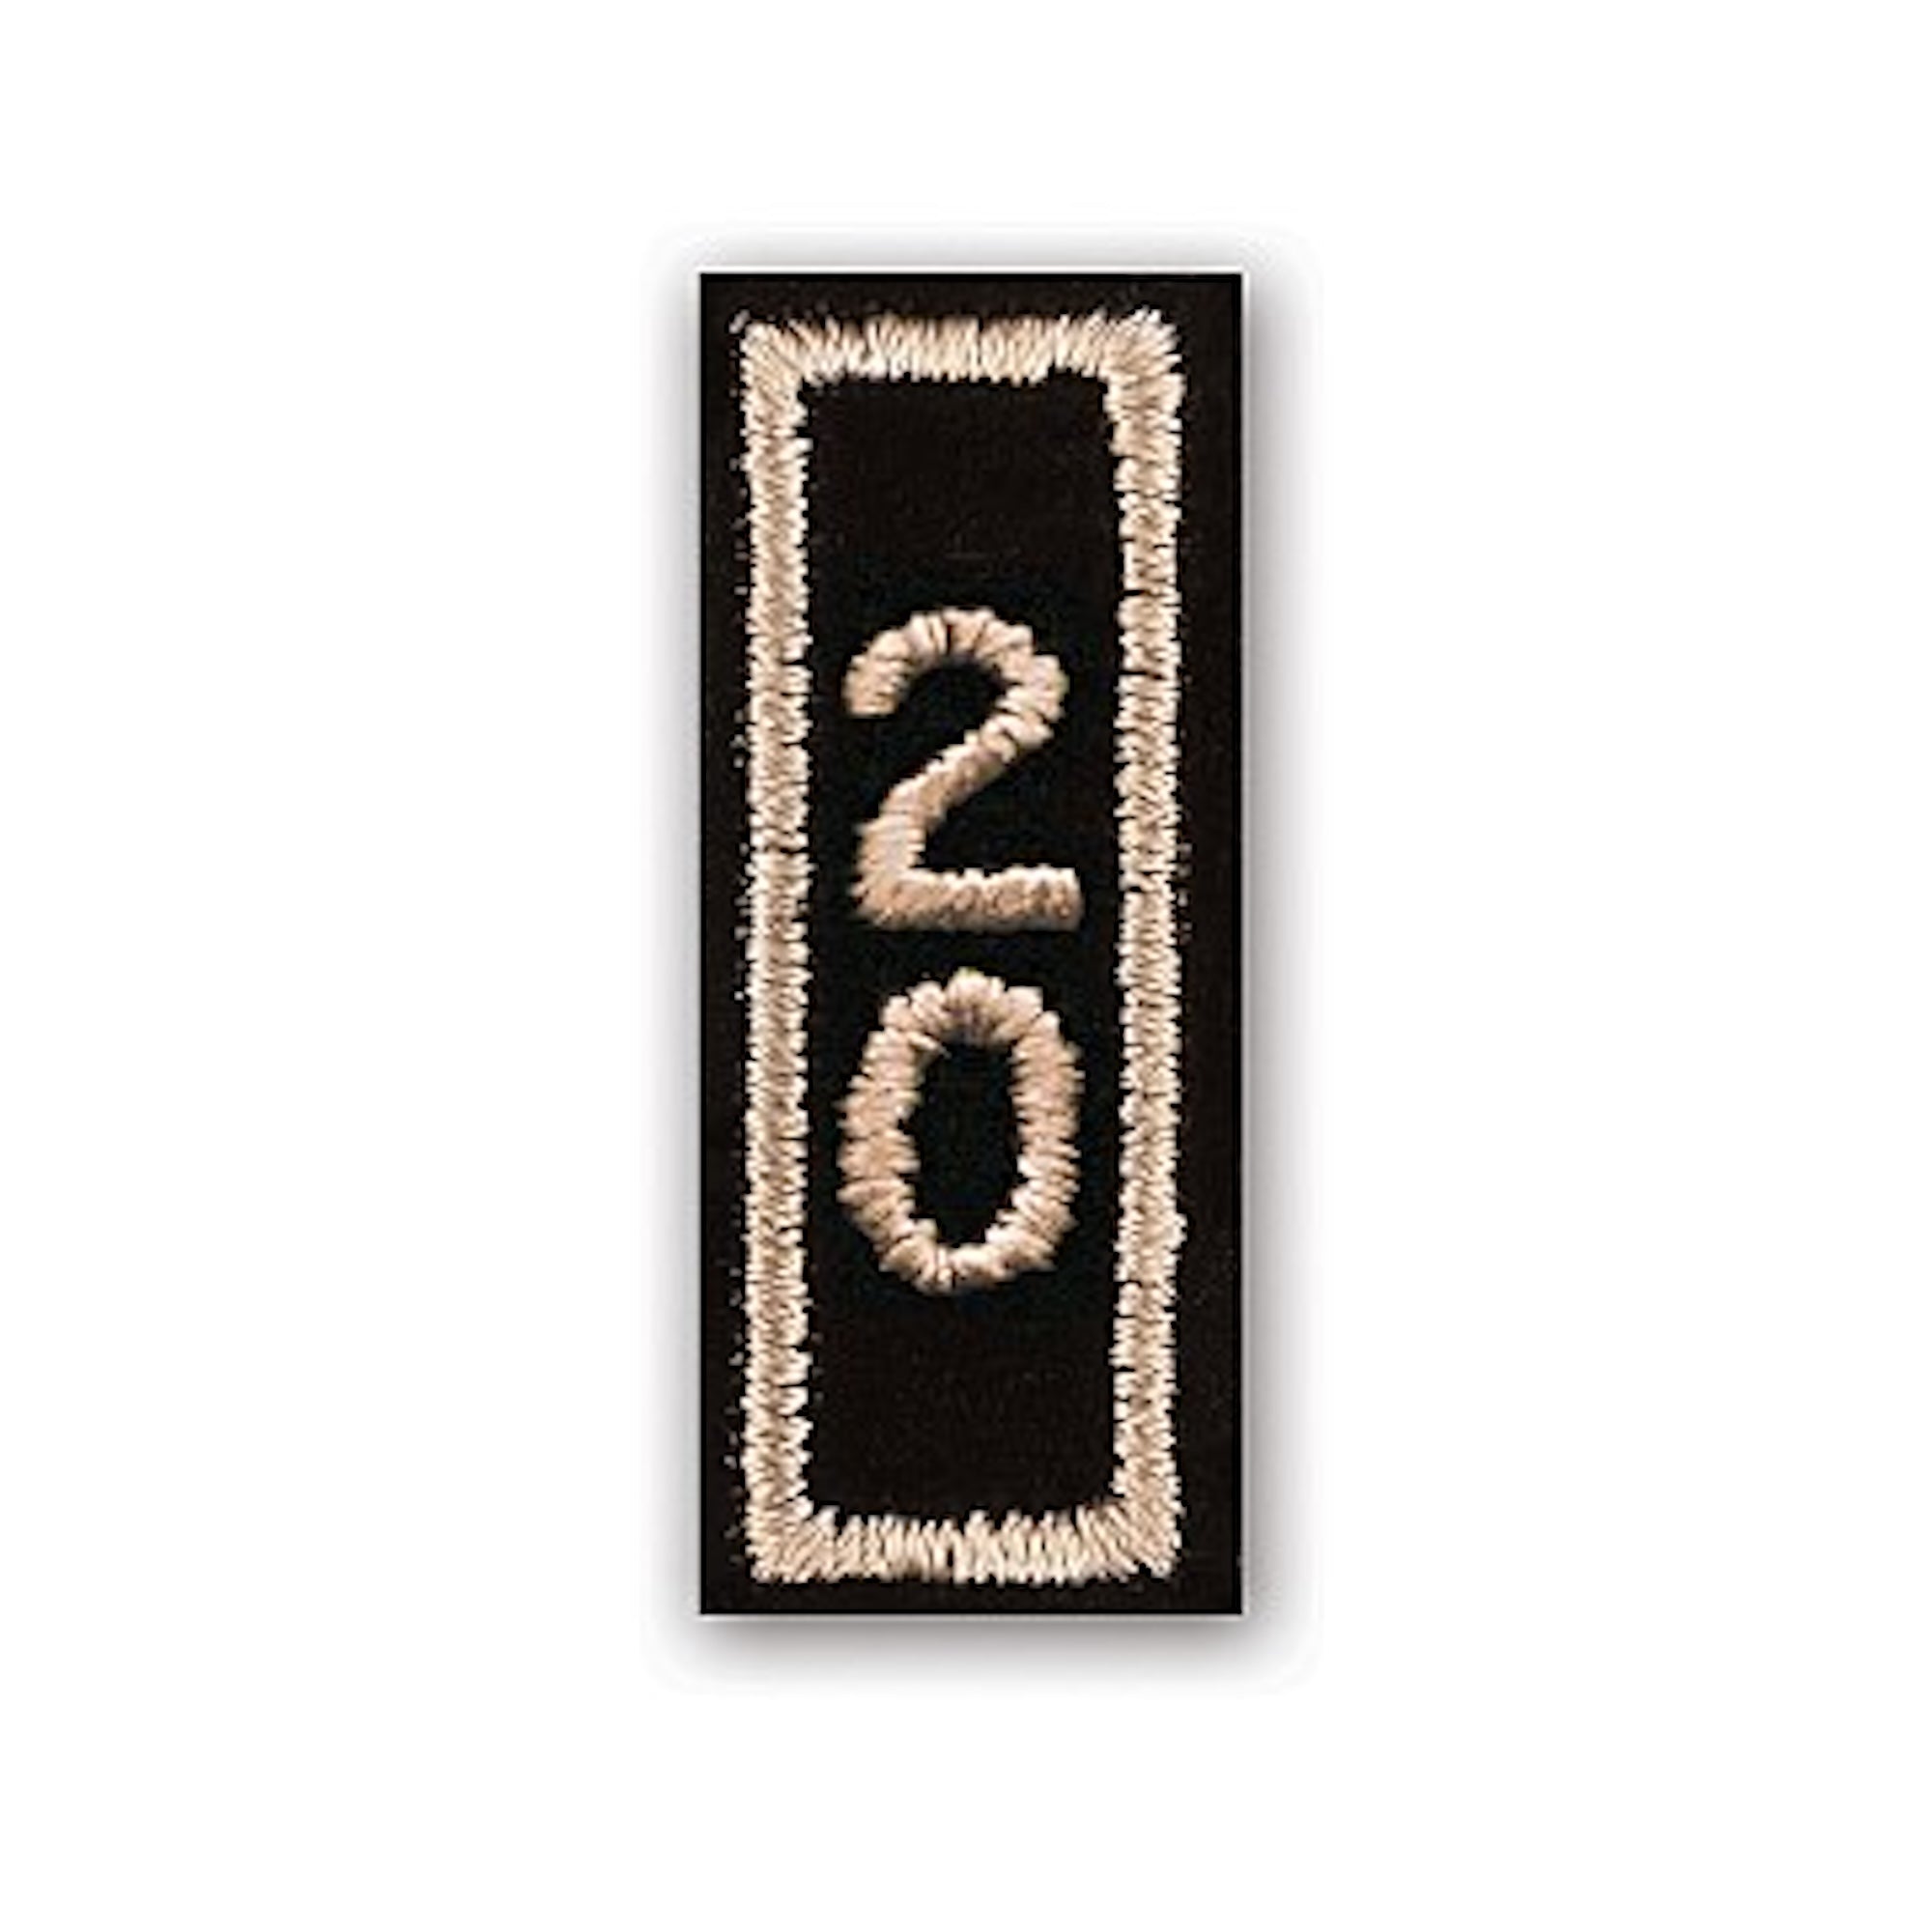 Jahr-20-Patch in Heritage Tan